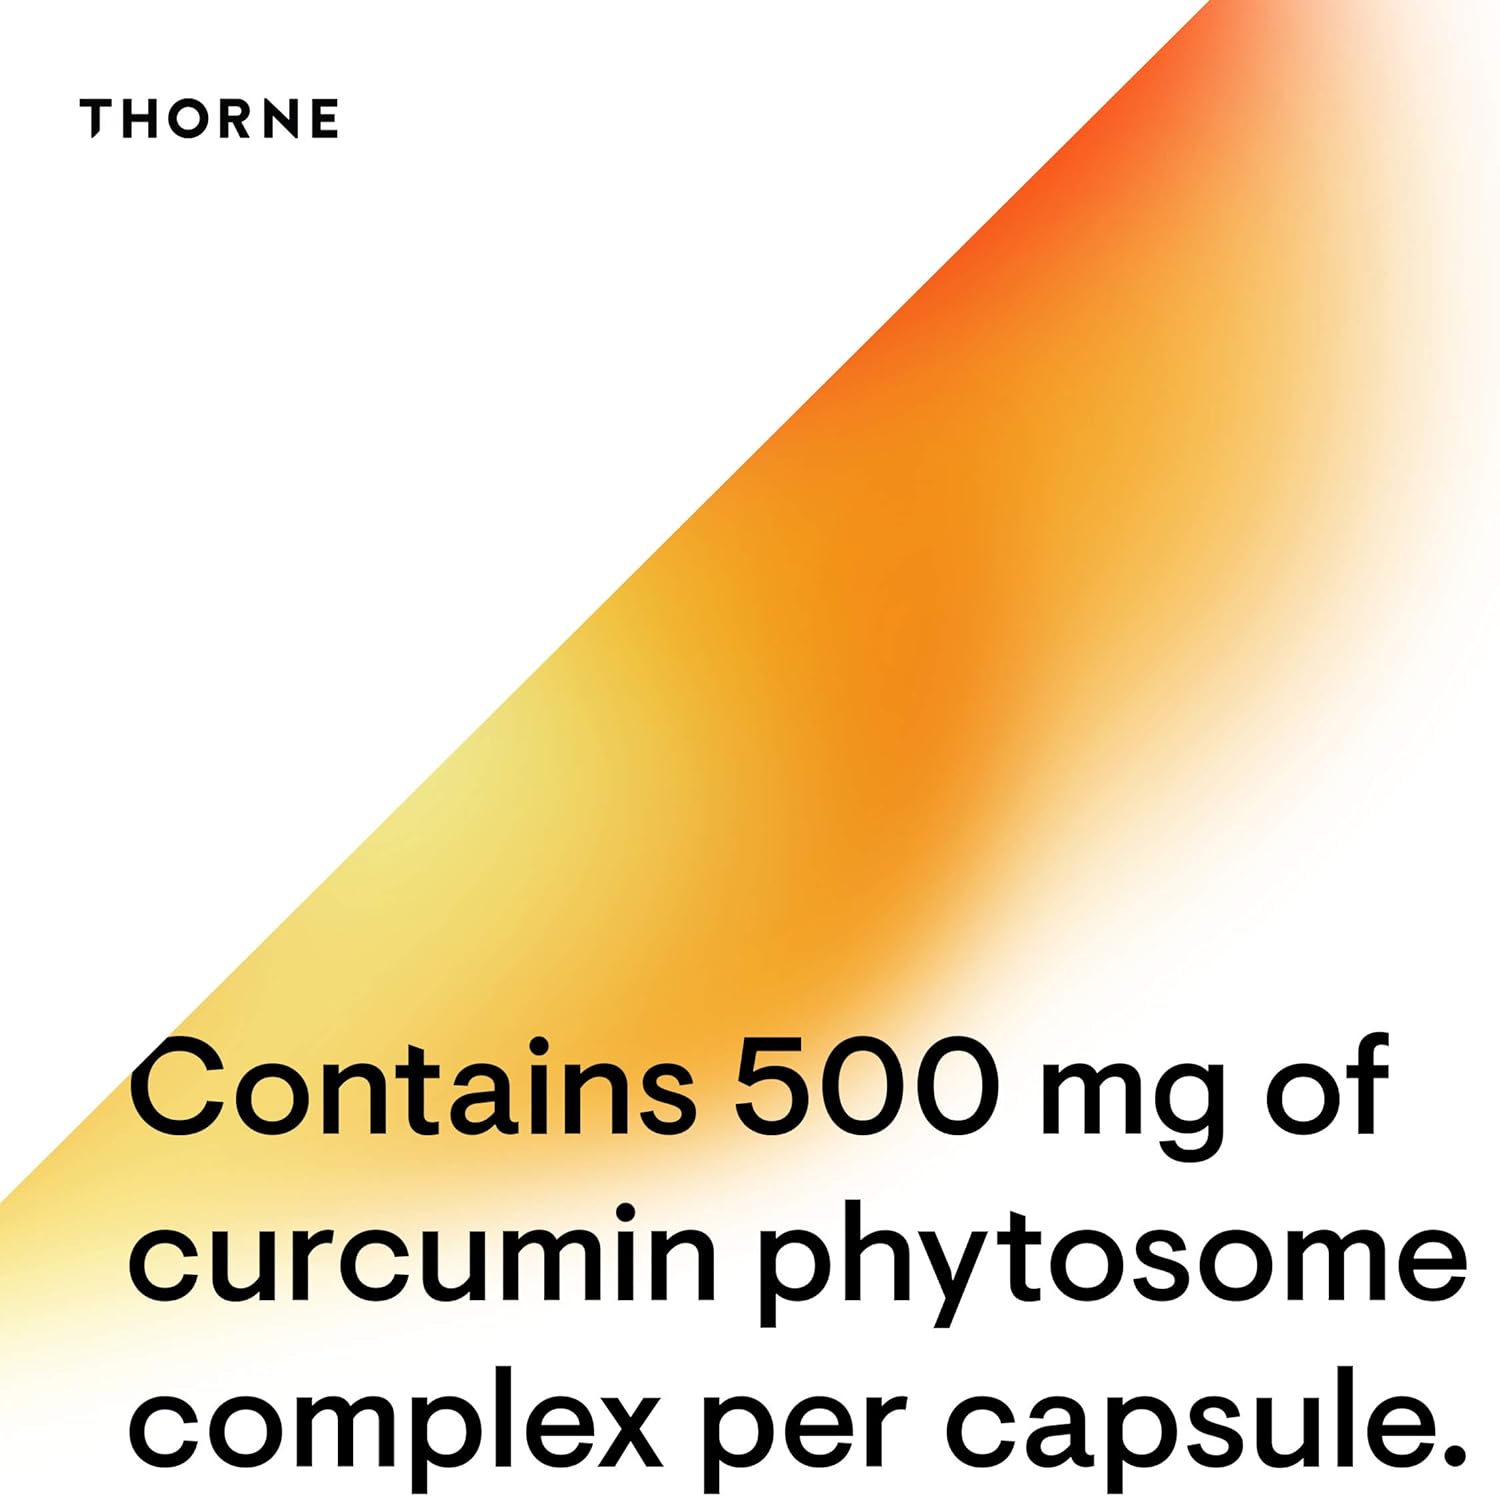 THORNE Curcumin Phytosome 1000 mg (Meriva) - Clinically Studied, High Absorption - Supports Healthy Inflammatory Response in Joints, Muscles, GI Tract, Liver, and Brain - 60 Capsules - 30 Servings : Health & Household